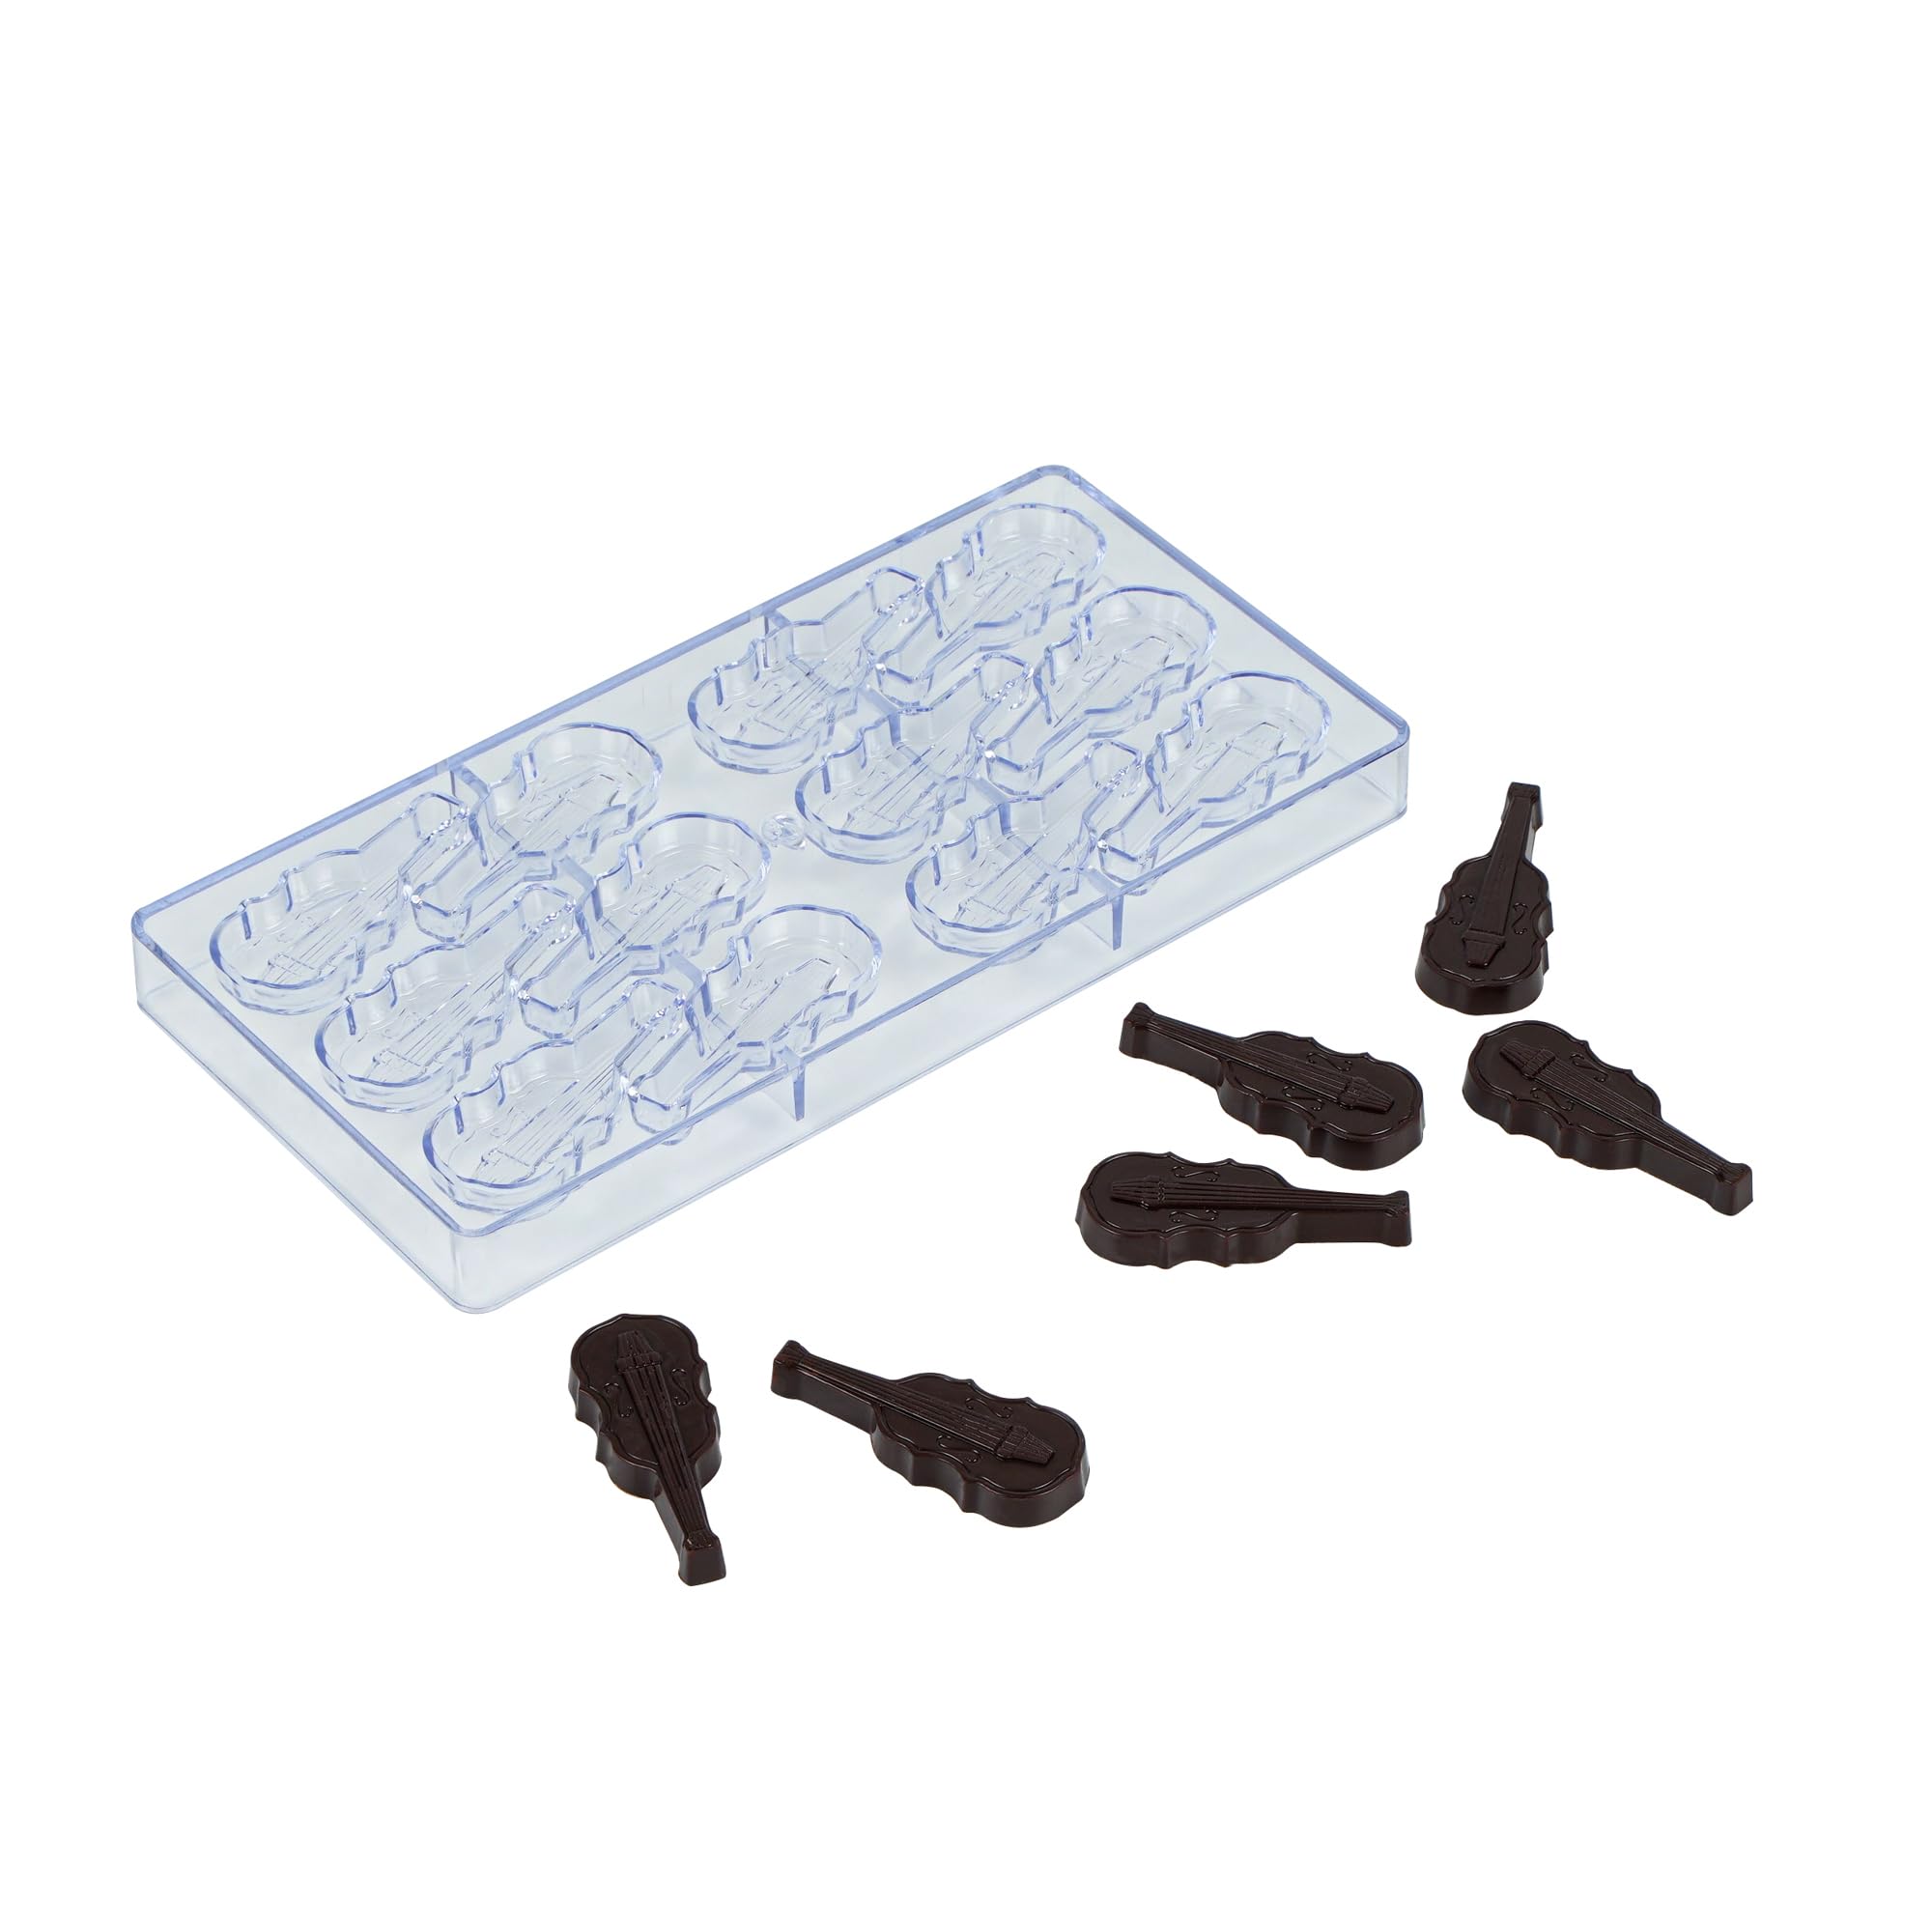 Pastry Tek 10.8 x 5.3 Inch Chocolate Shaping Molds, 10 Freezable Candy Molds - 12 Cavities, Violin-Shaped, Clear Polycarbonate Chocolate Molds, Dishwashable, Easy To Release - Restaurantware